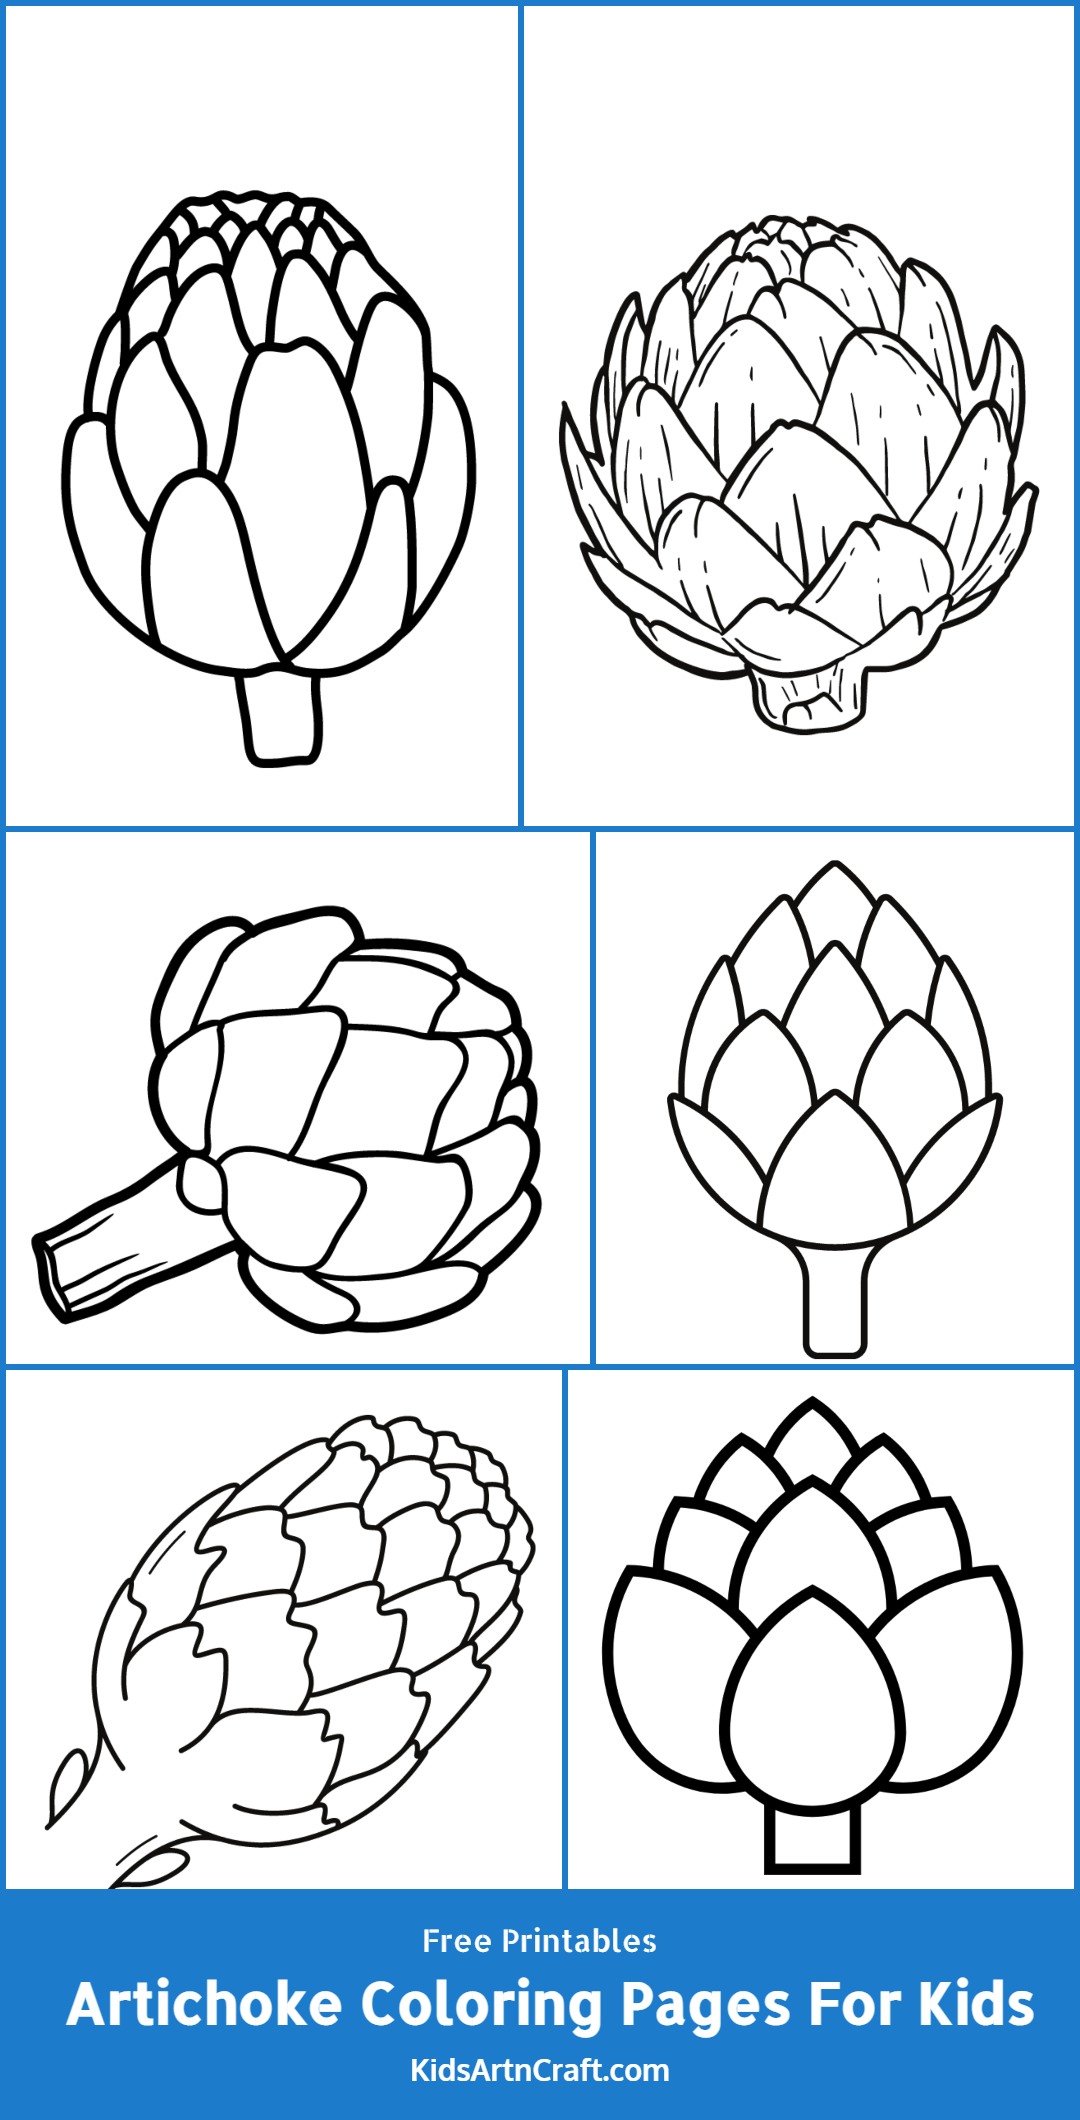 Artichoke Coloring Pages For Kids – Free Printables   Kids Art & Craft